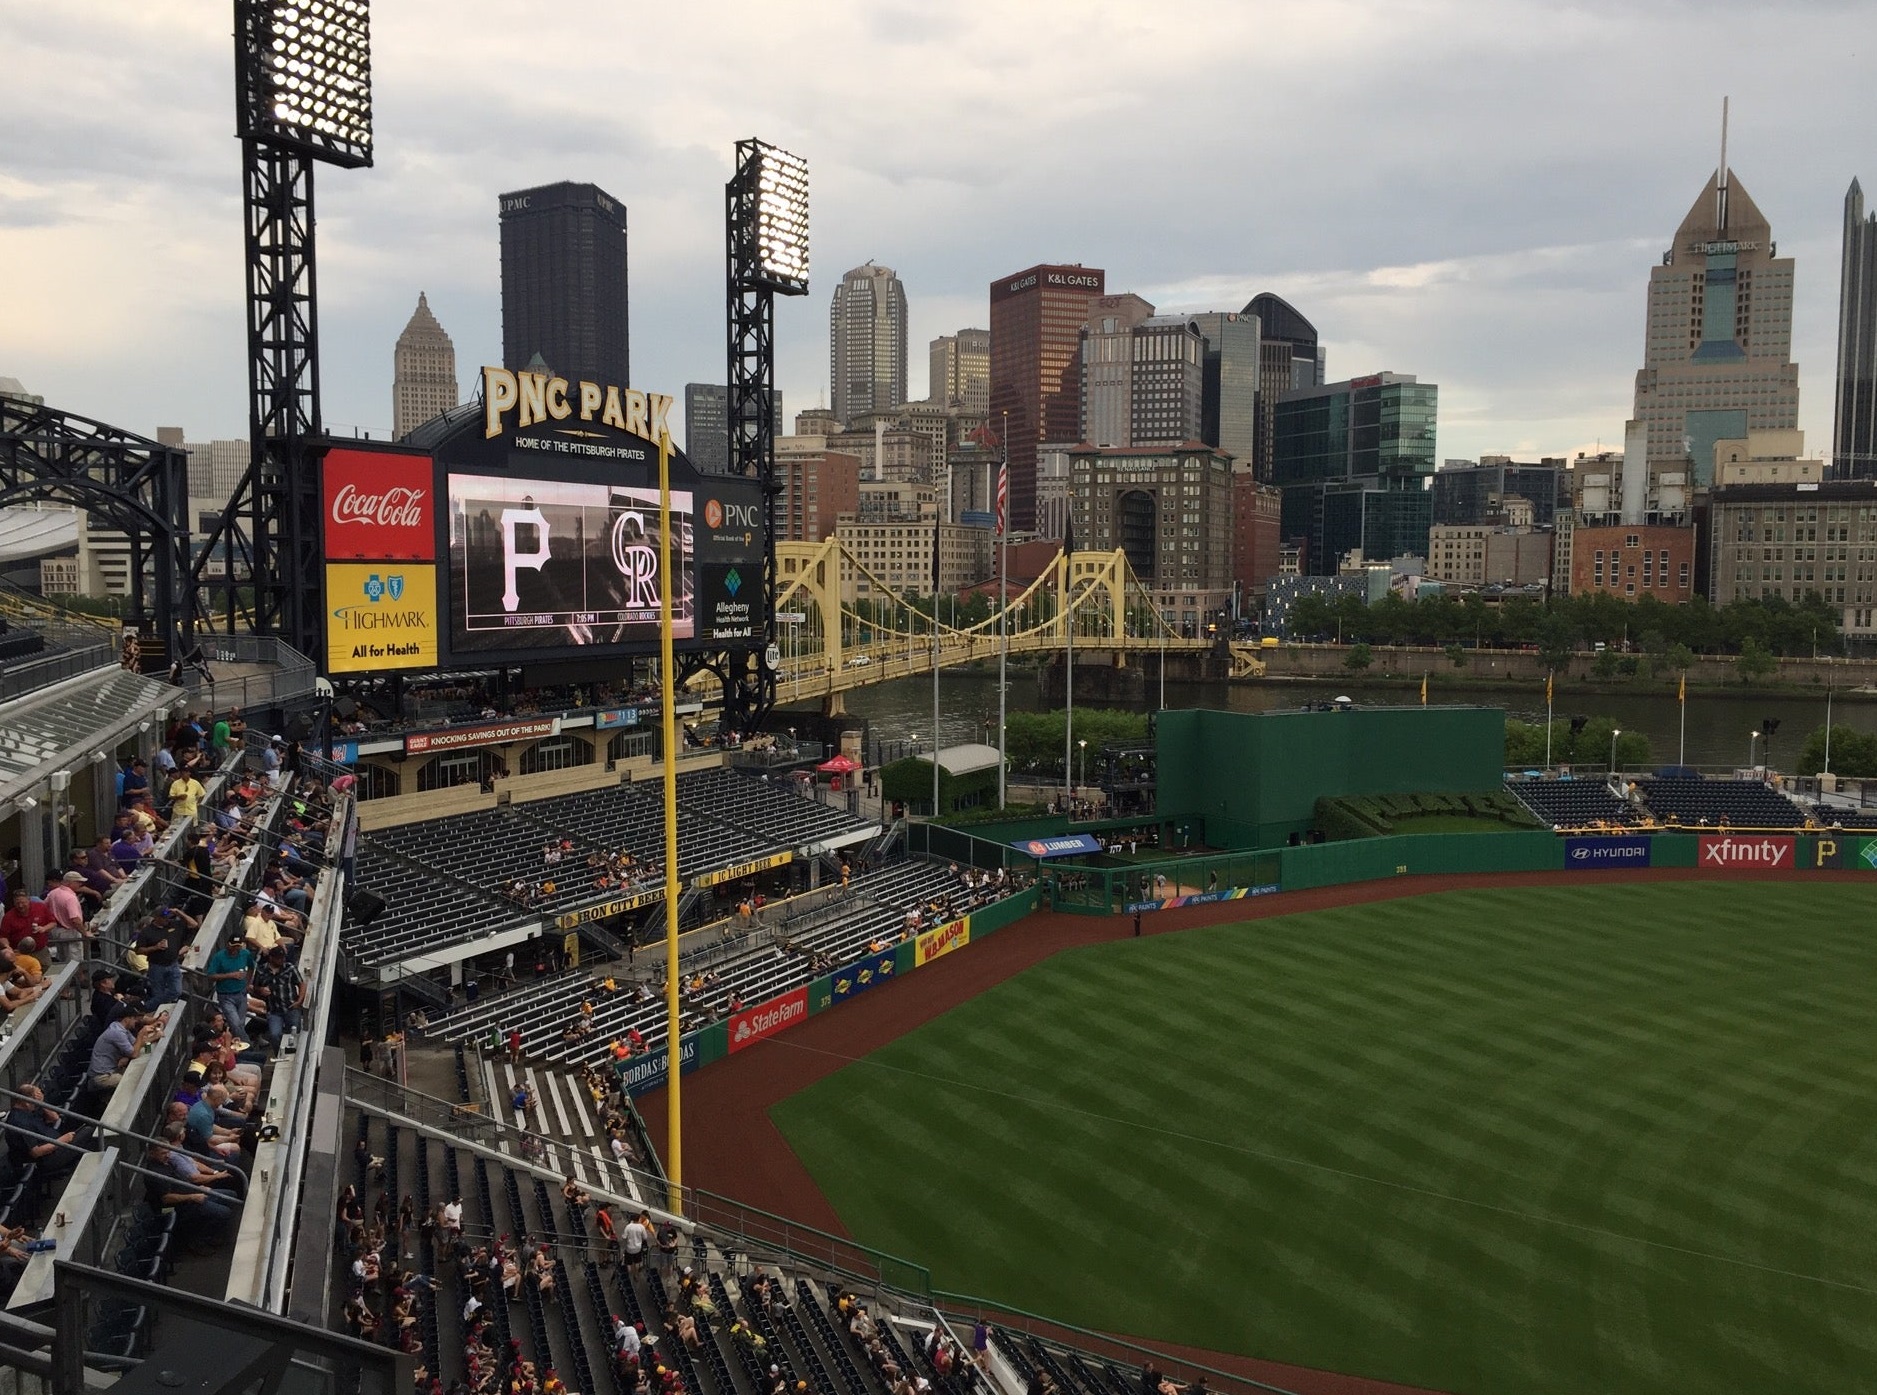 pittsburgh skyline from pnc park